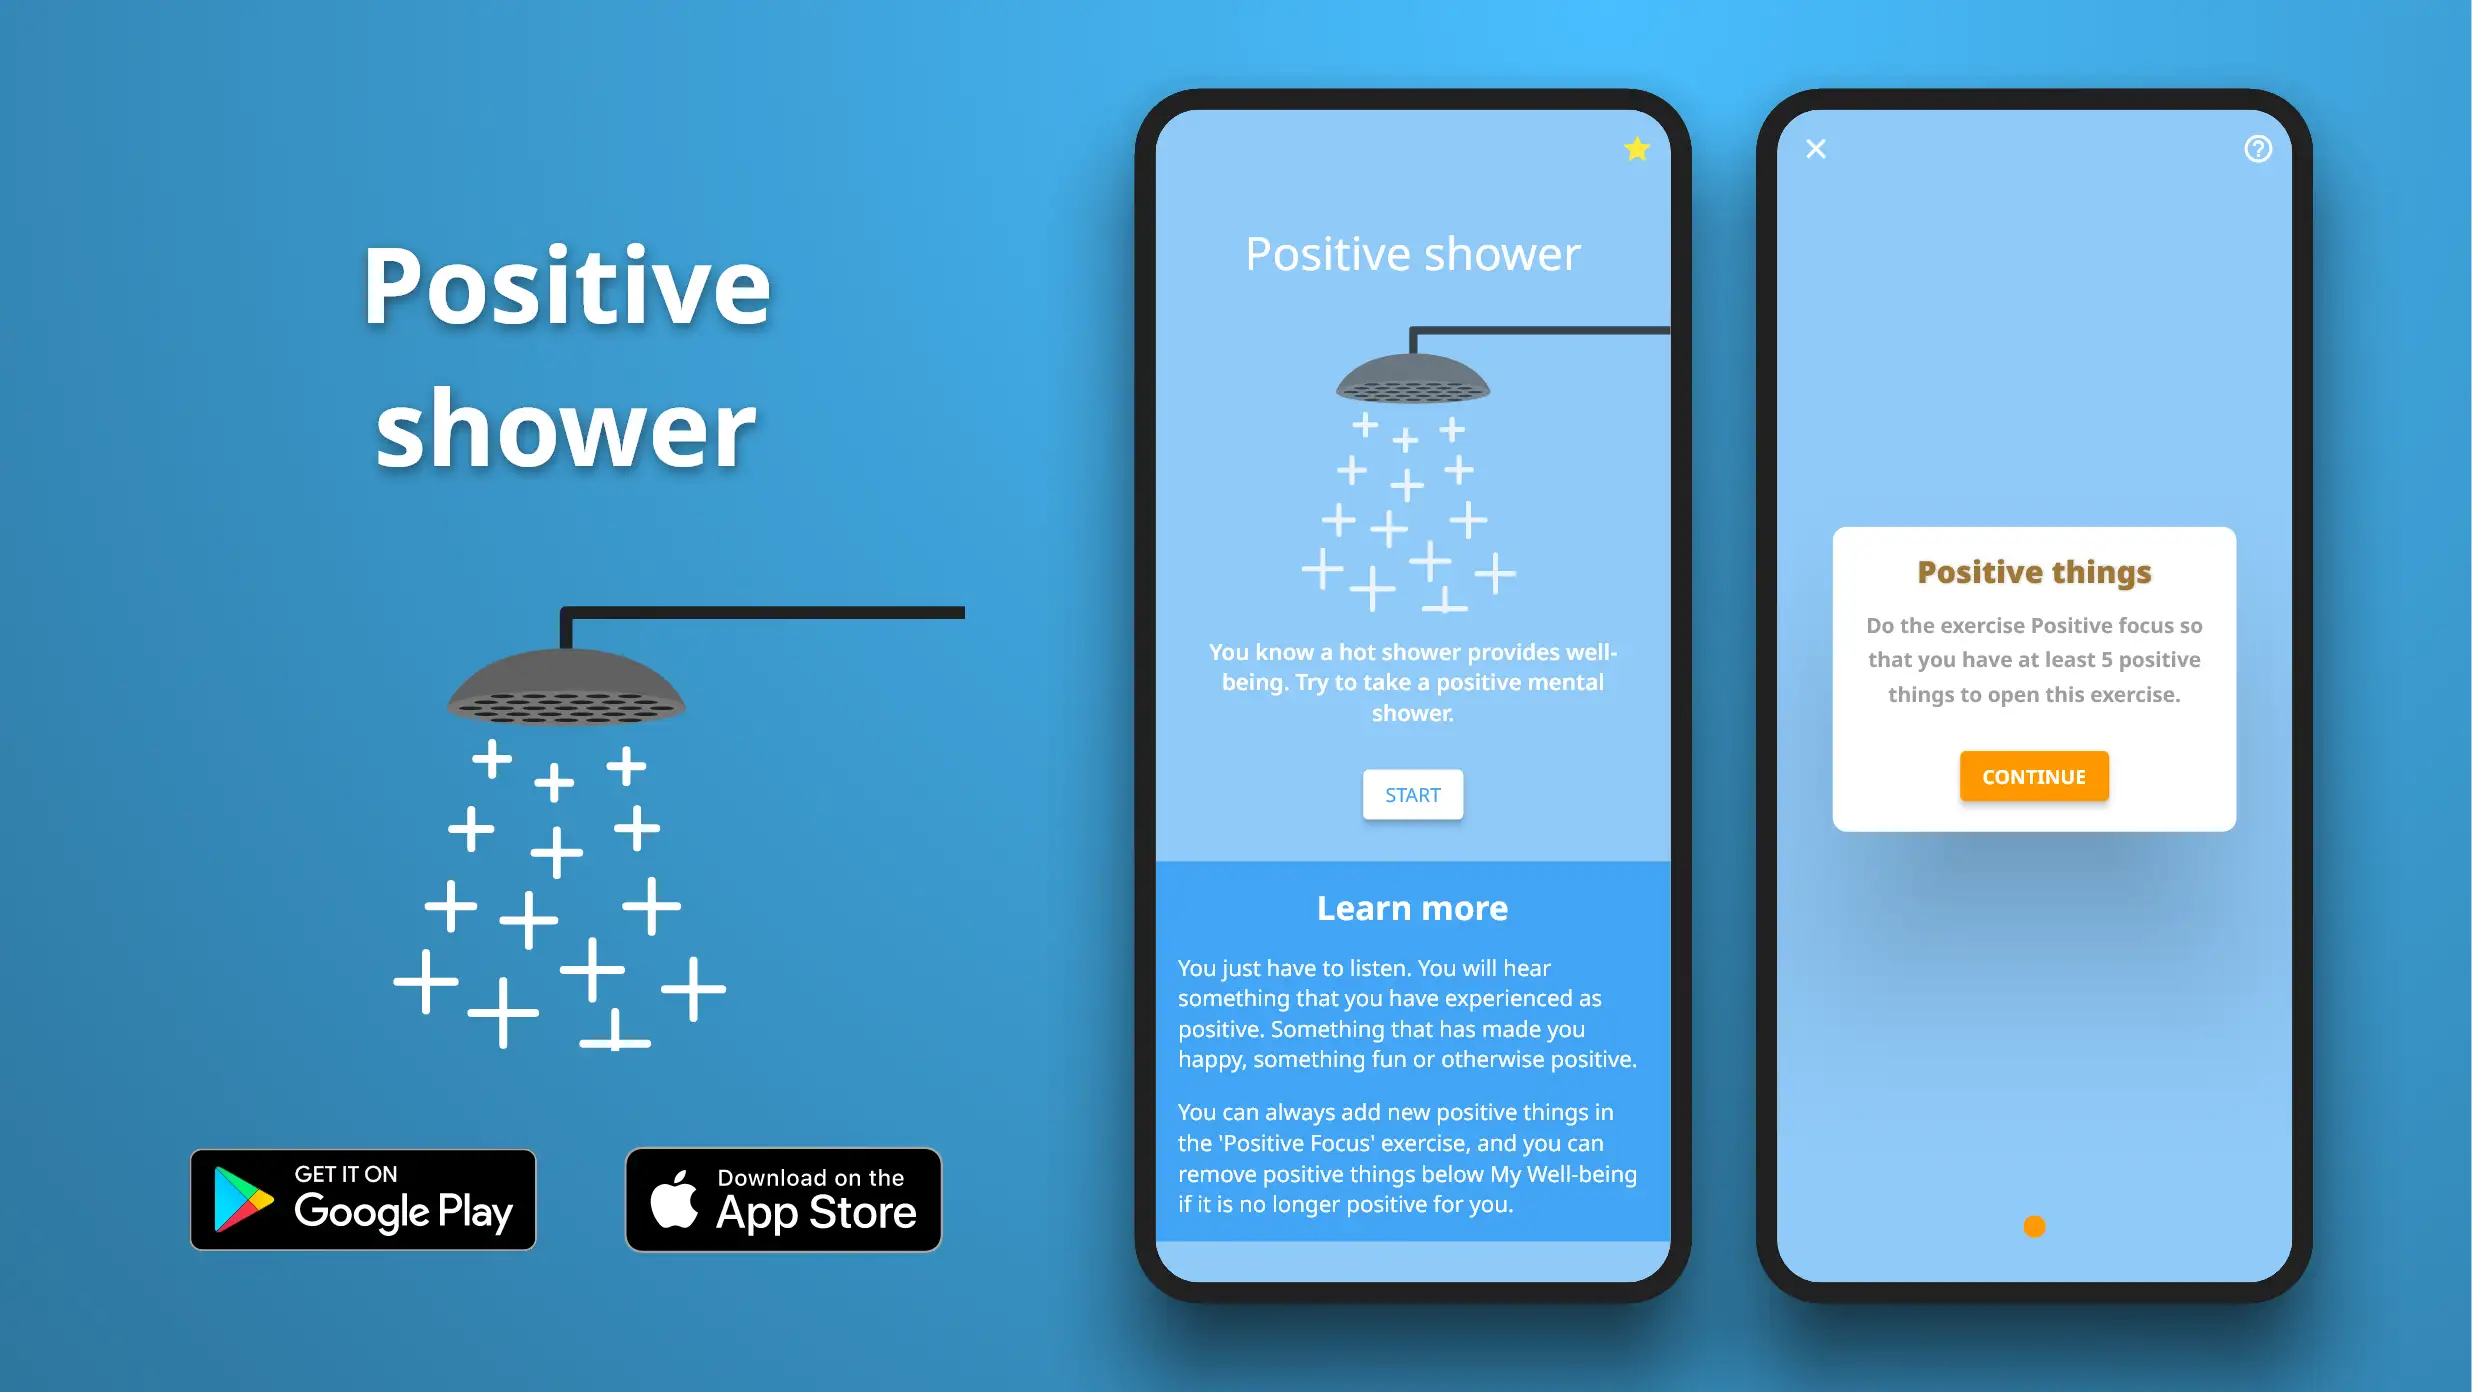 Positive shower exercise in the Meta Learn app.